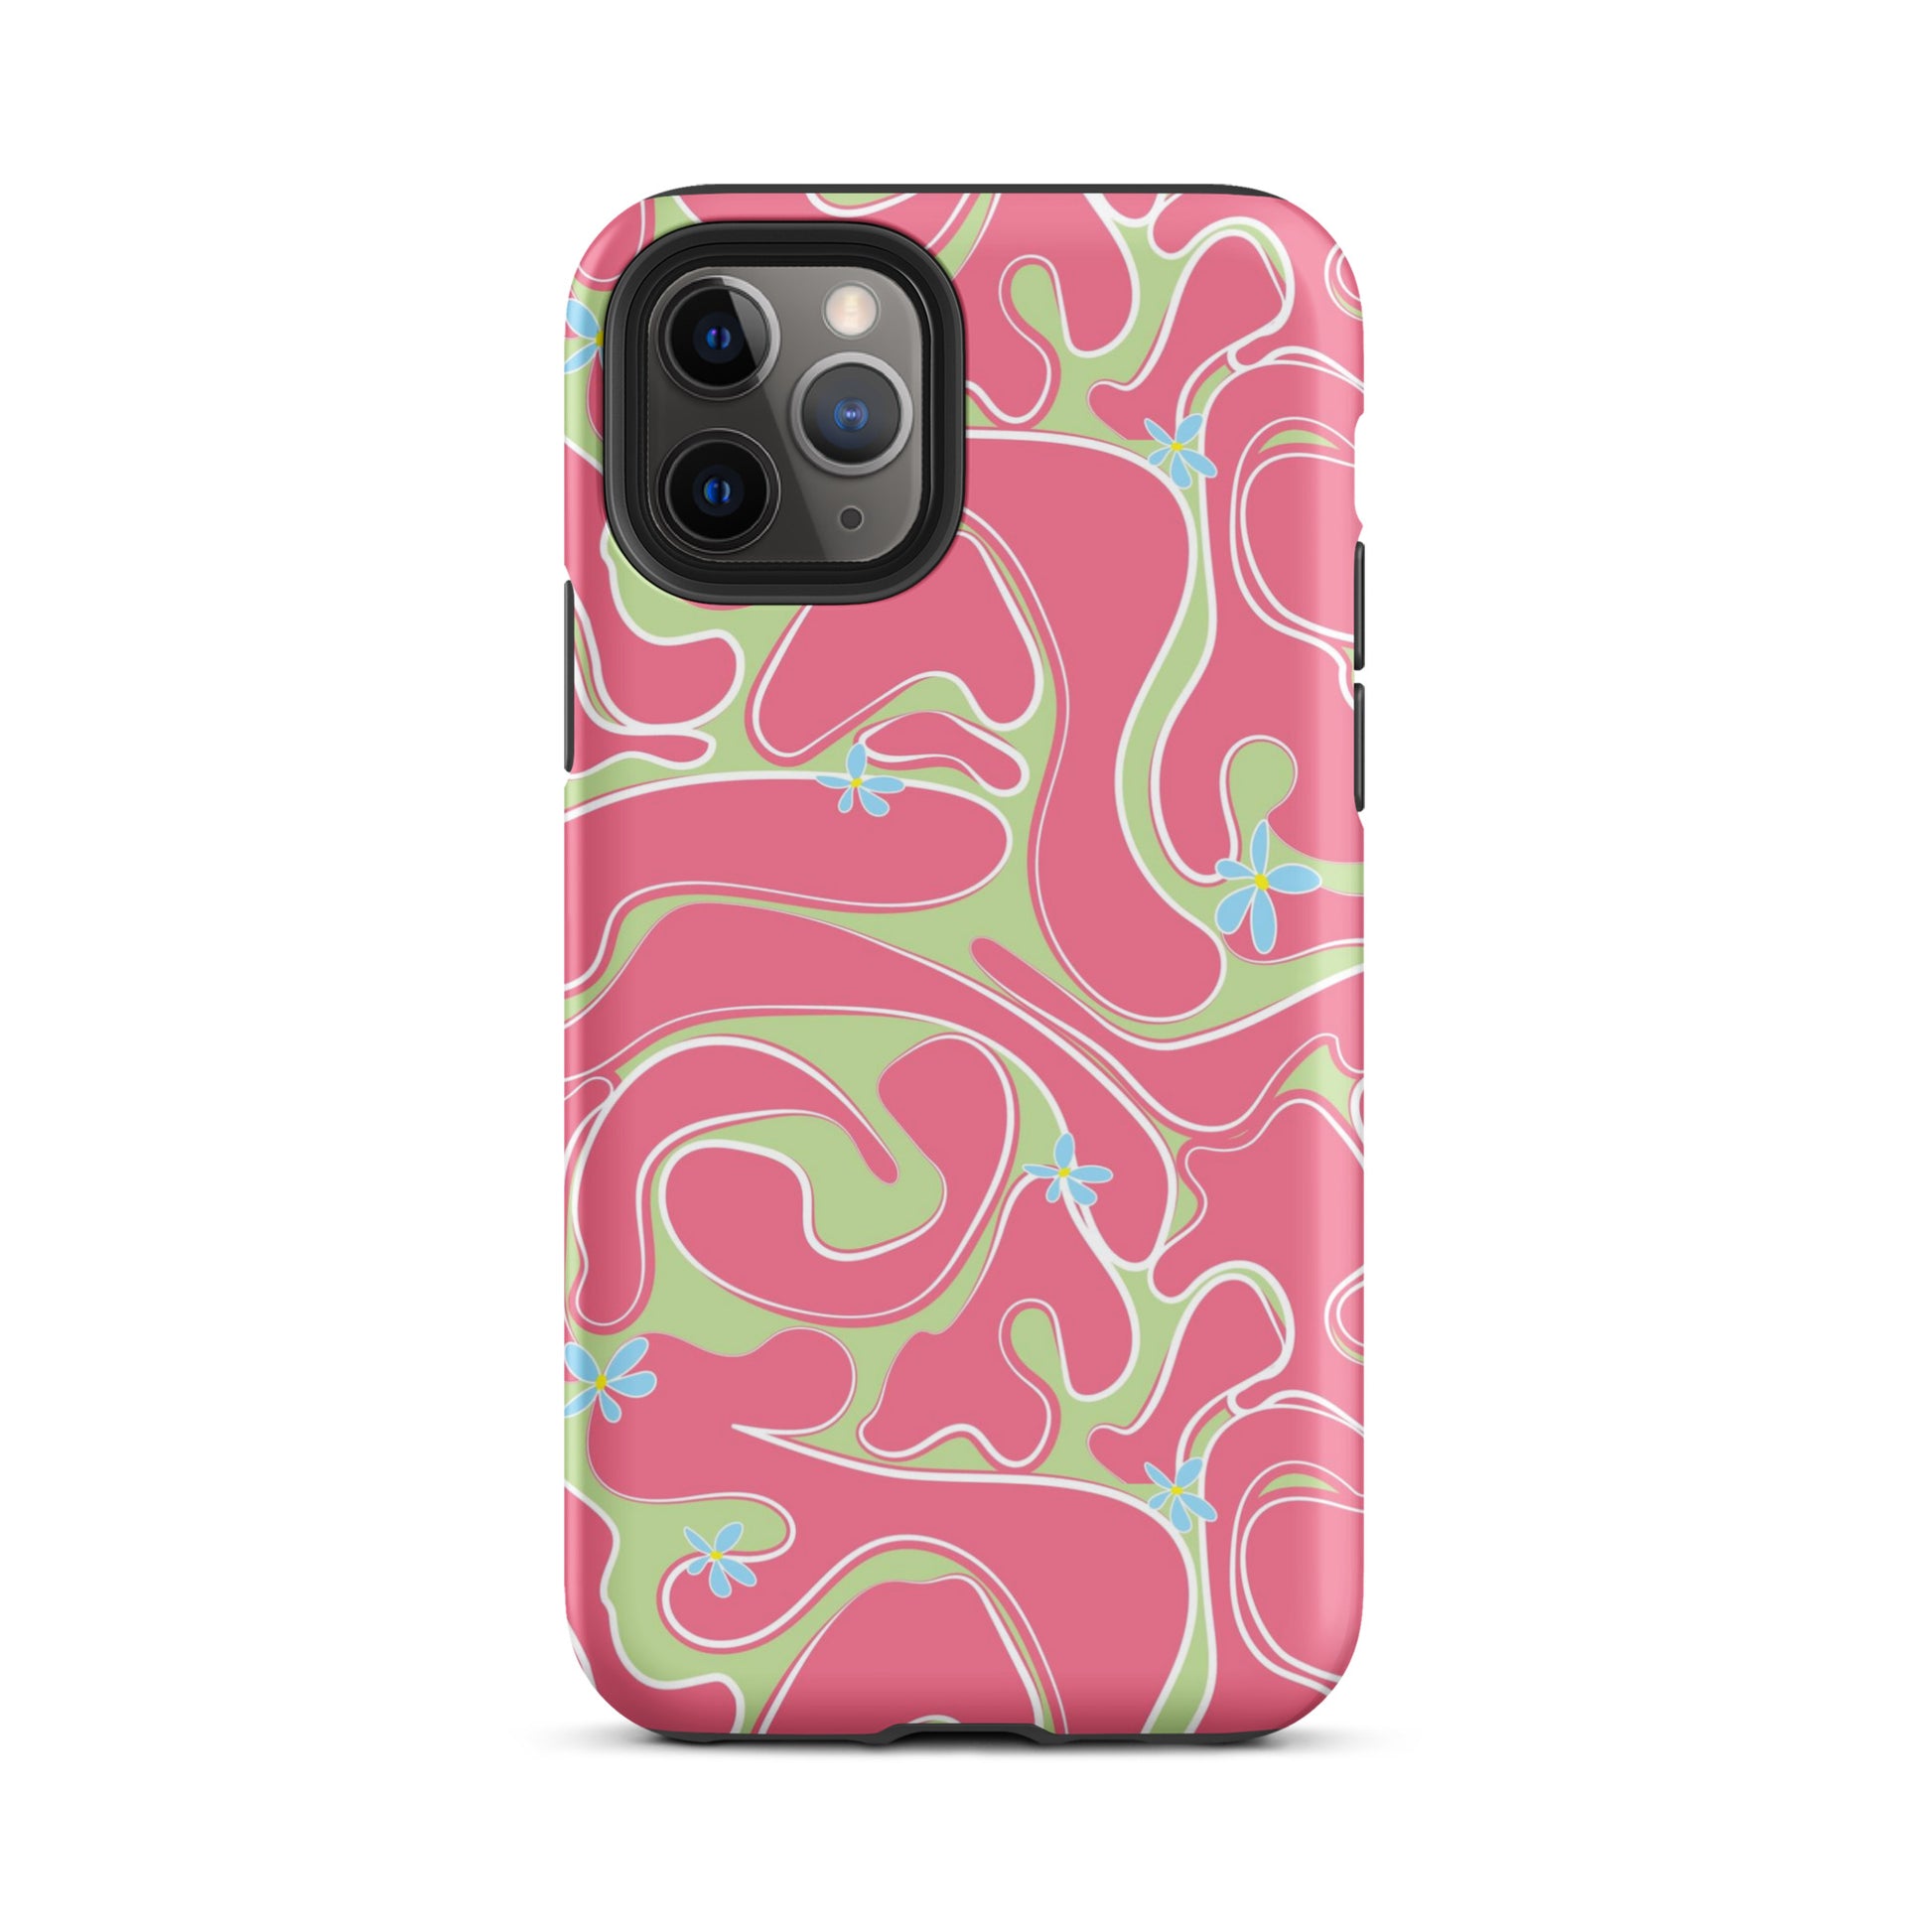 Reef Waves iPhone Case Matte iPhone 11 Pro